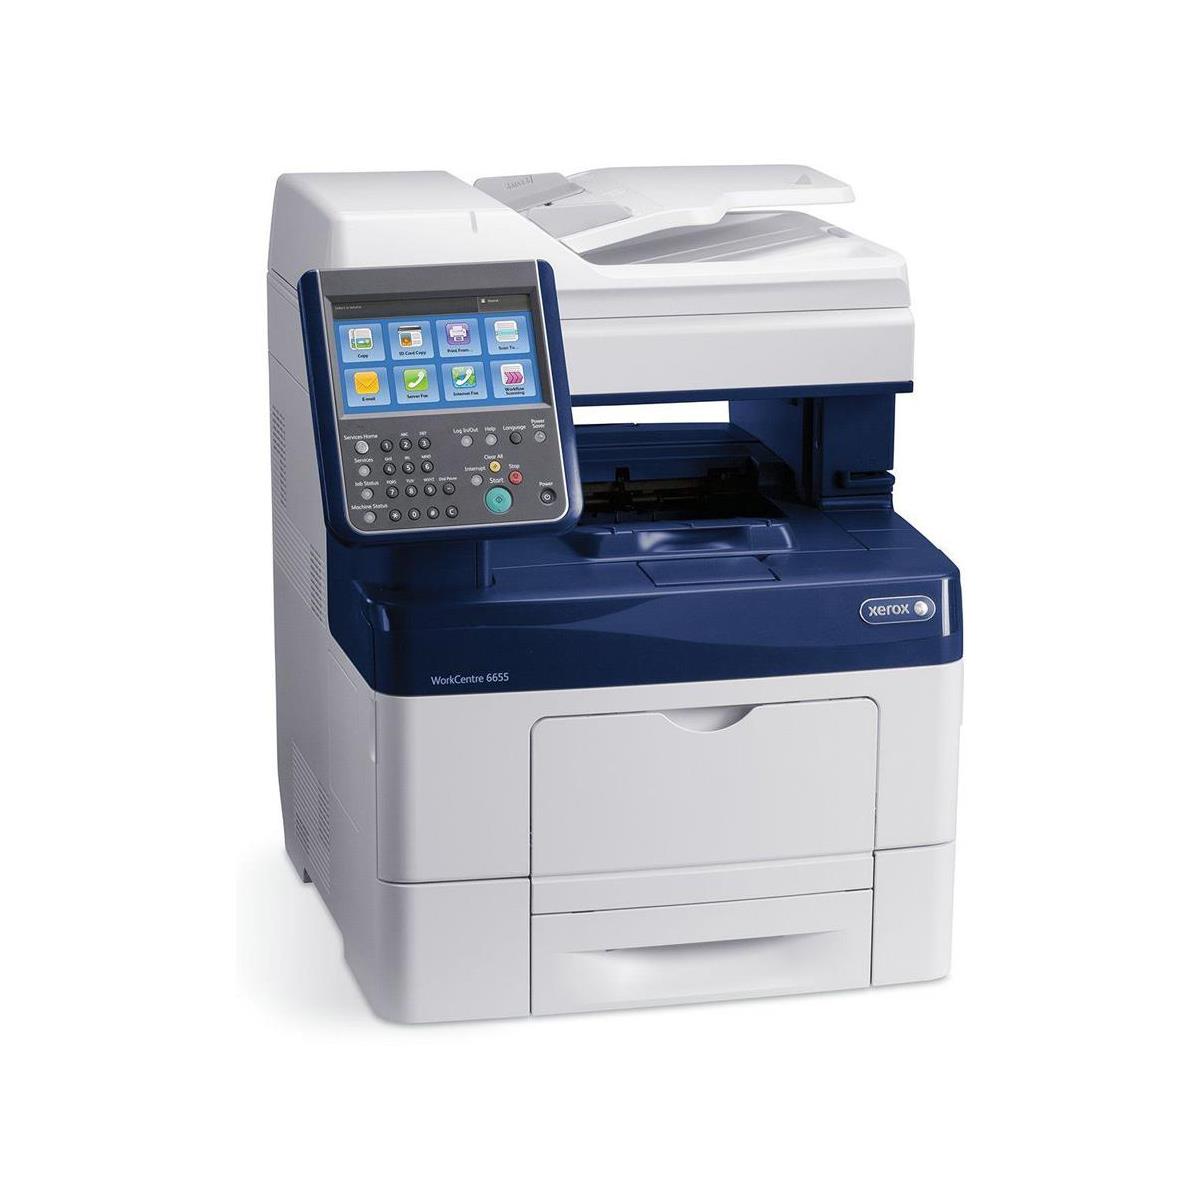 Image of Xerox WorkCentre 6655/X Color Multifunction Laser Printer